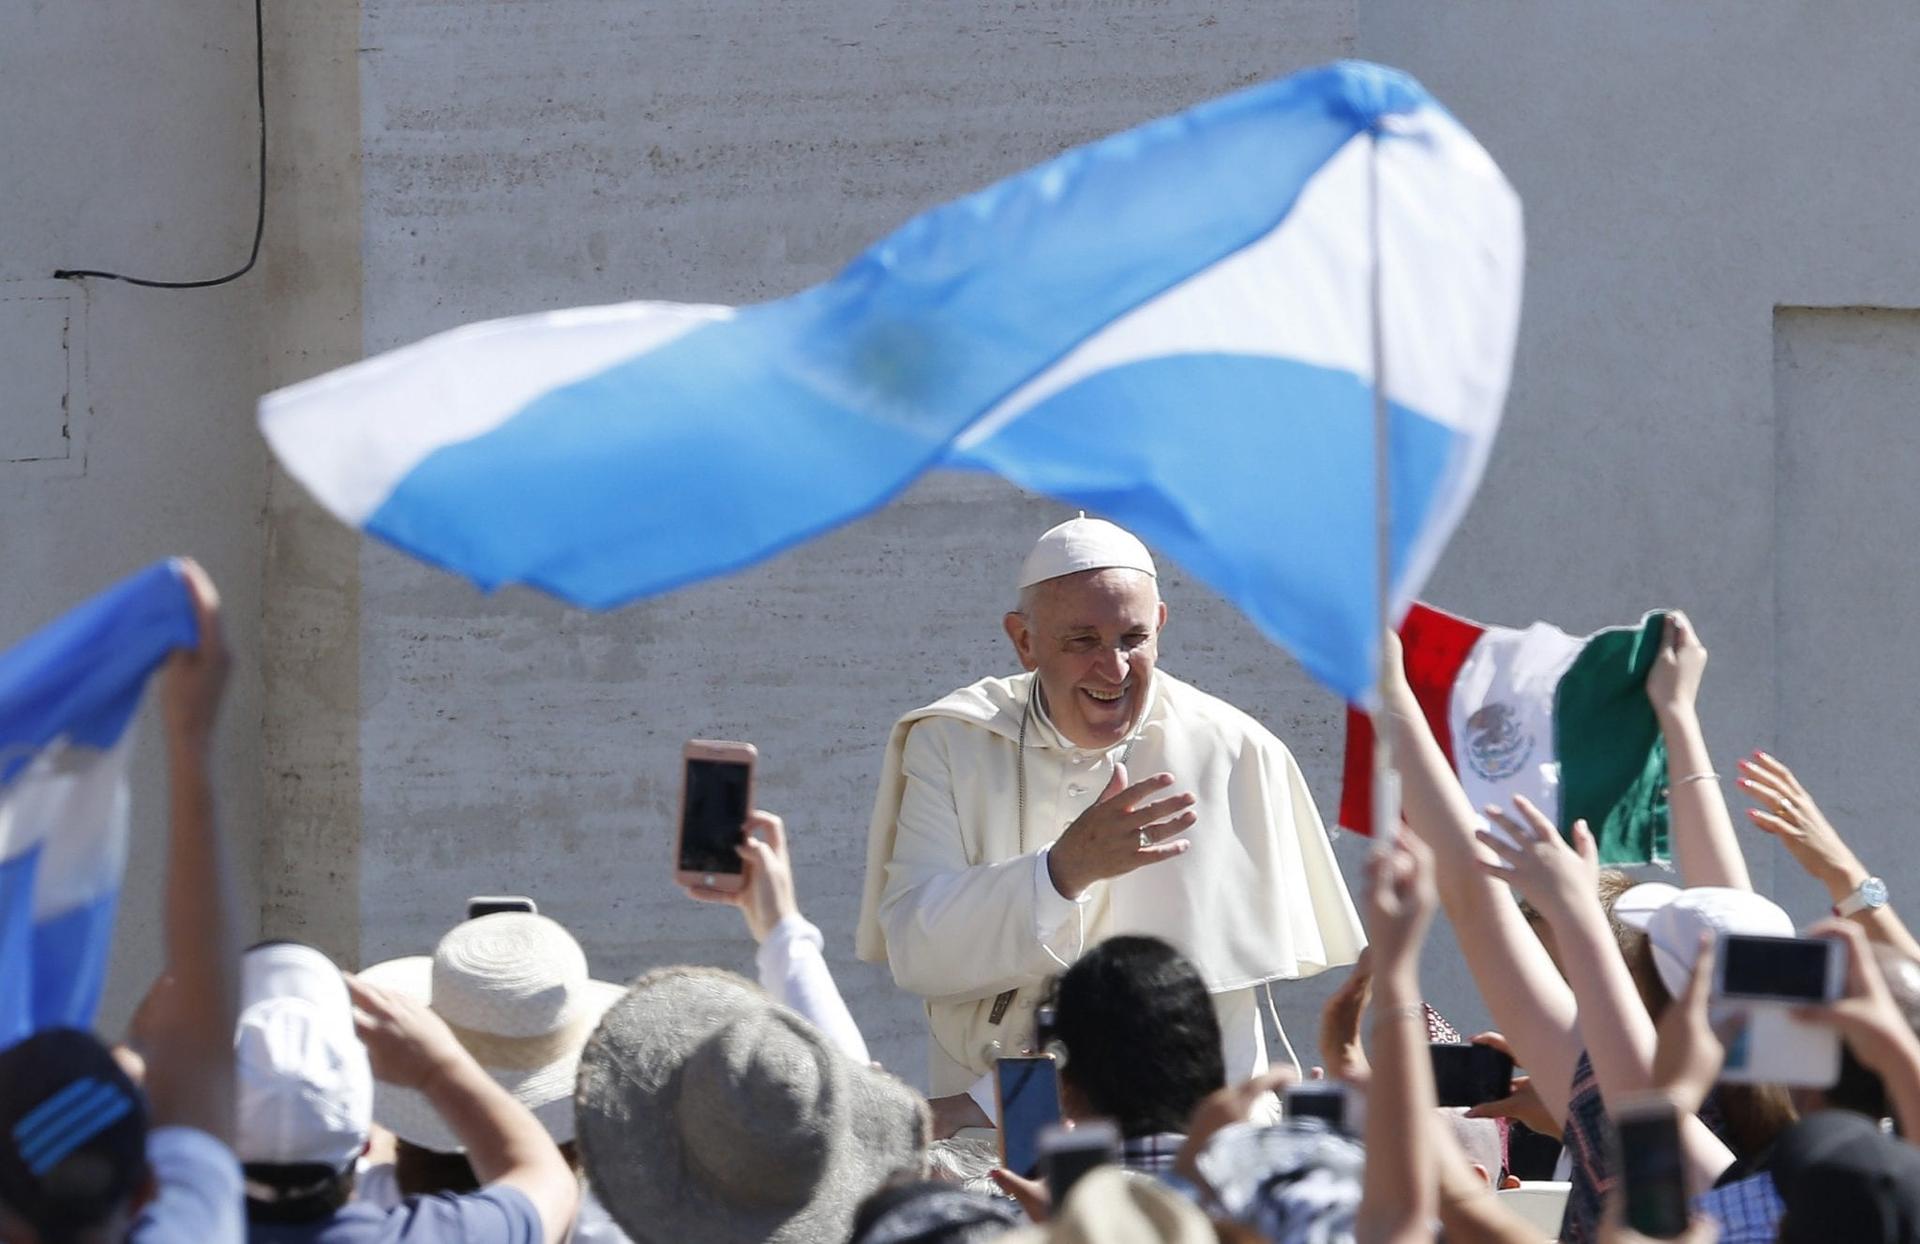 ‘Francis effect’ in Argentina’s alternate reality a mix of light and shadows